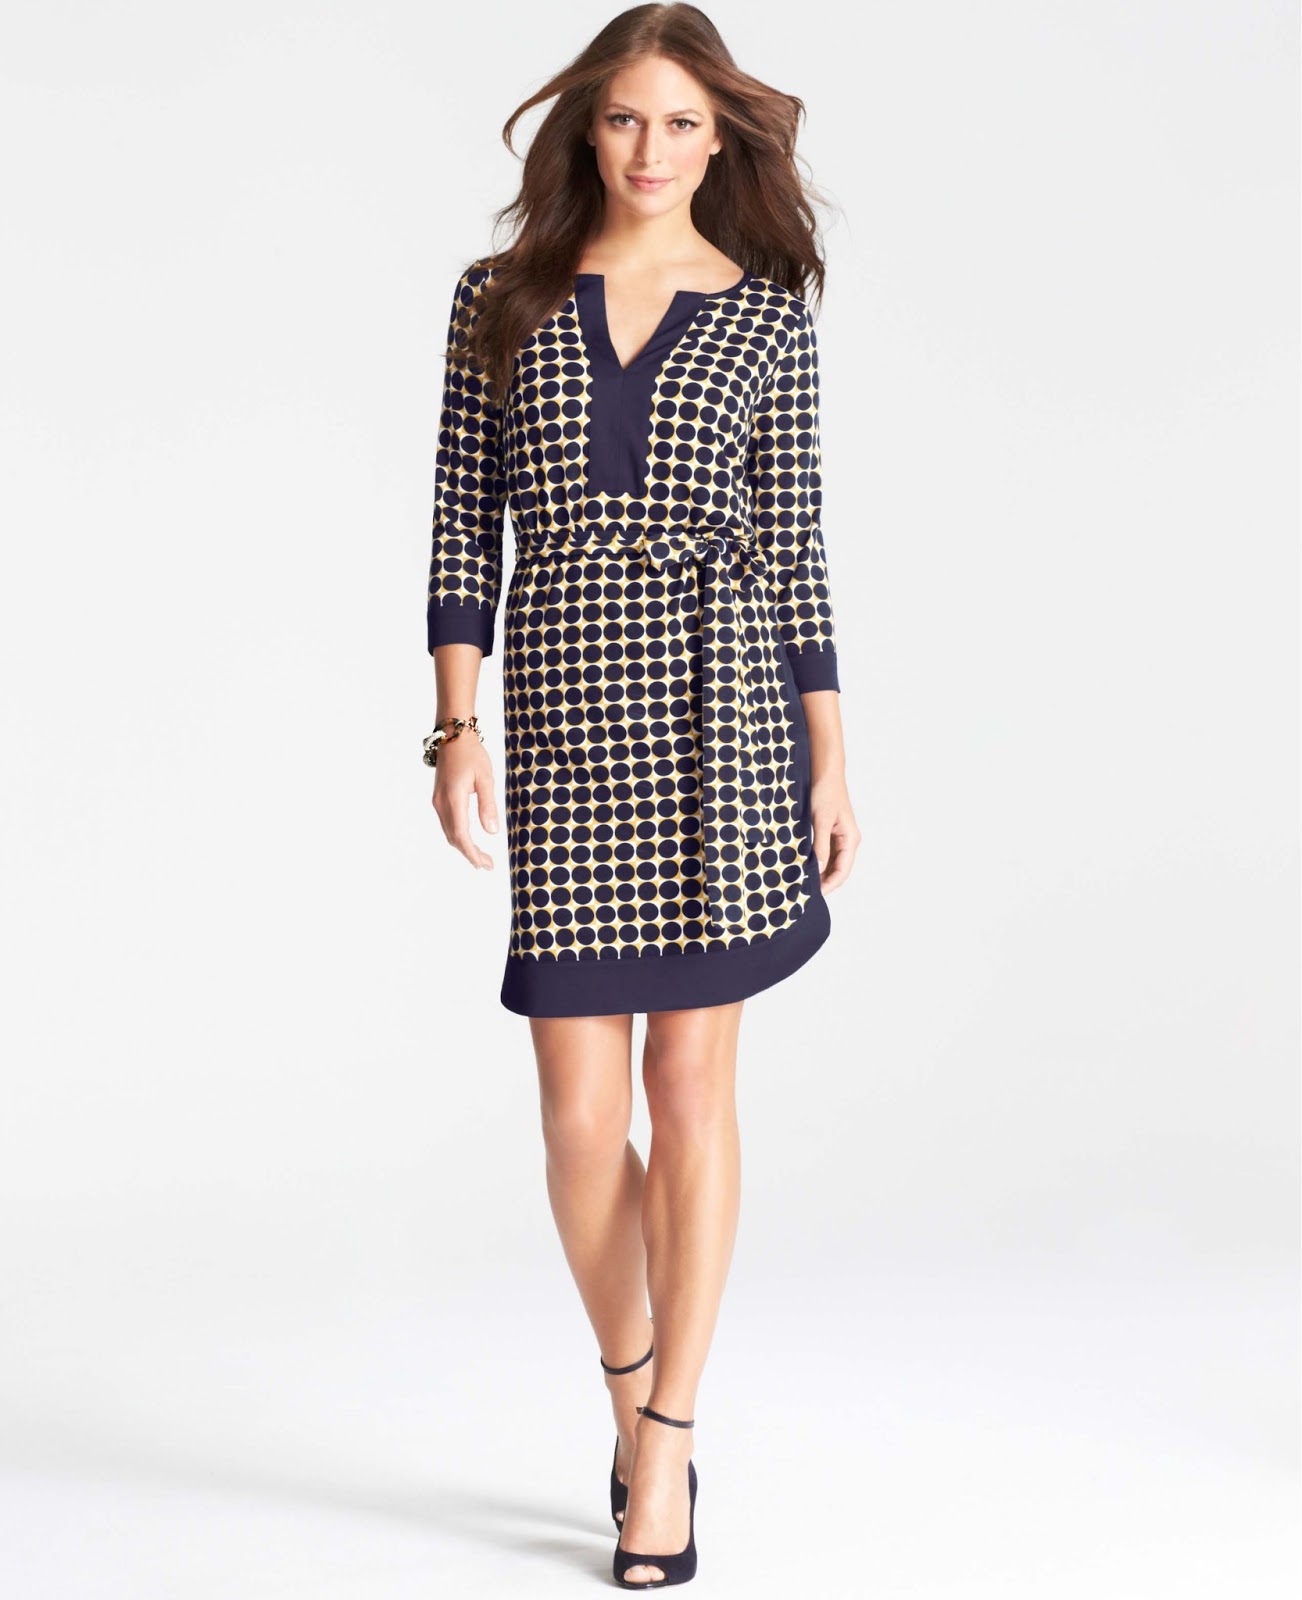 Pre-fall new arrivals at Ann Taylor - NYC Recessionista